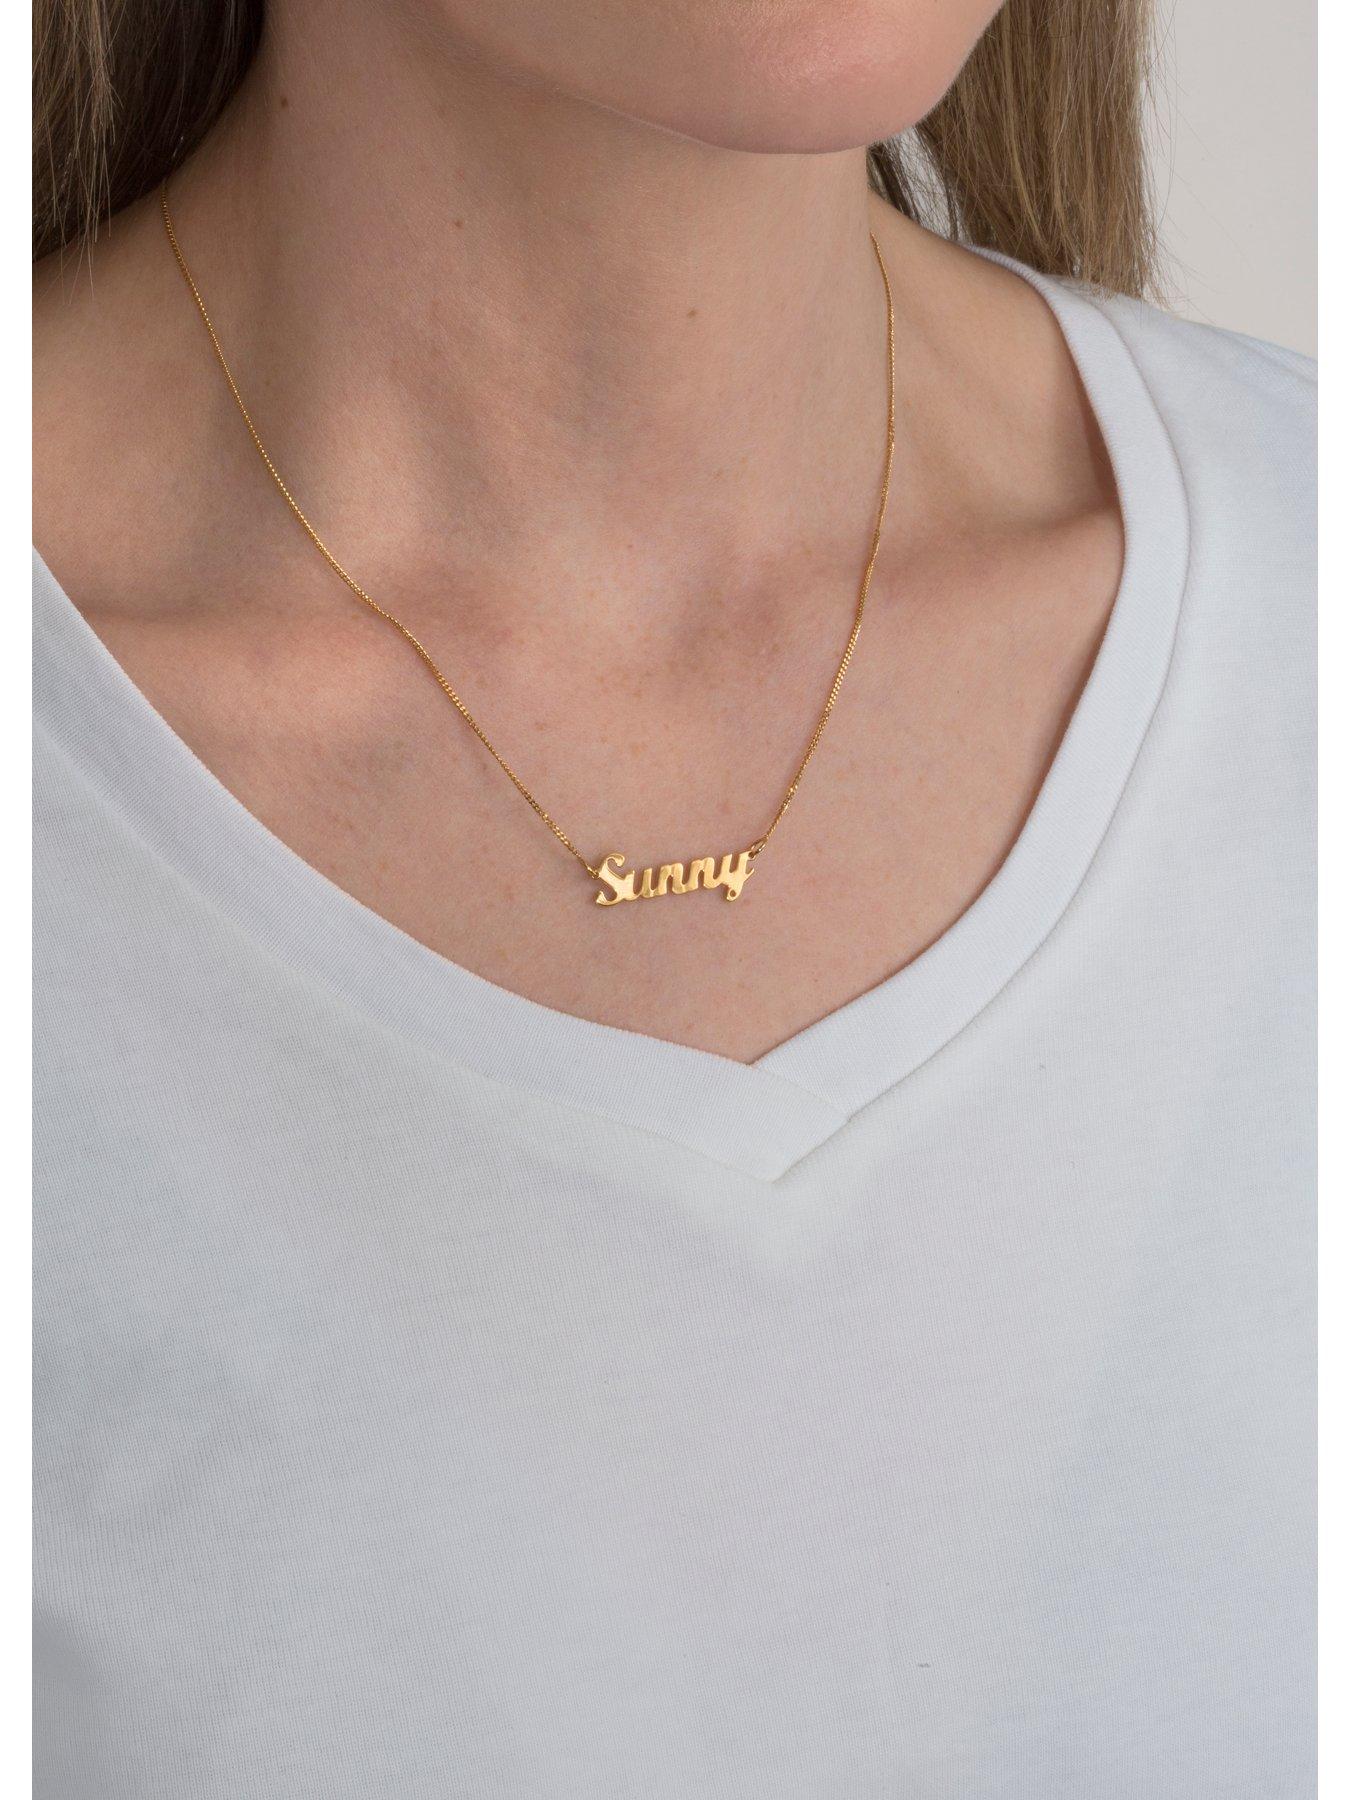  Gold Plated Sterling Silver Personalised Script Name Necklace on adjustable curb chain